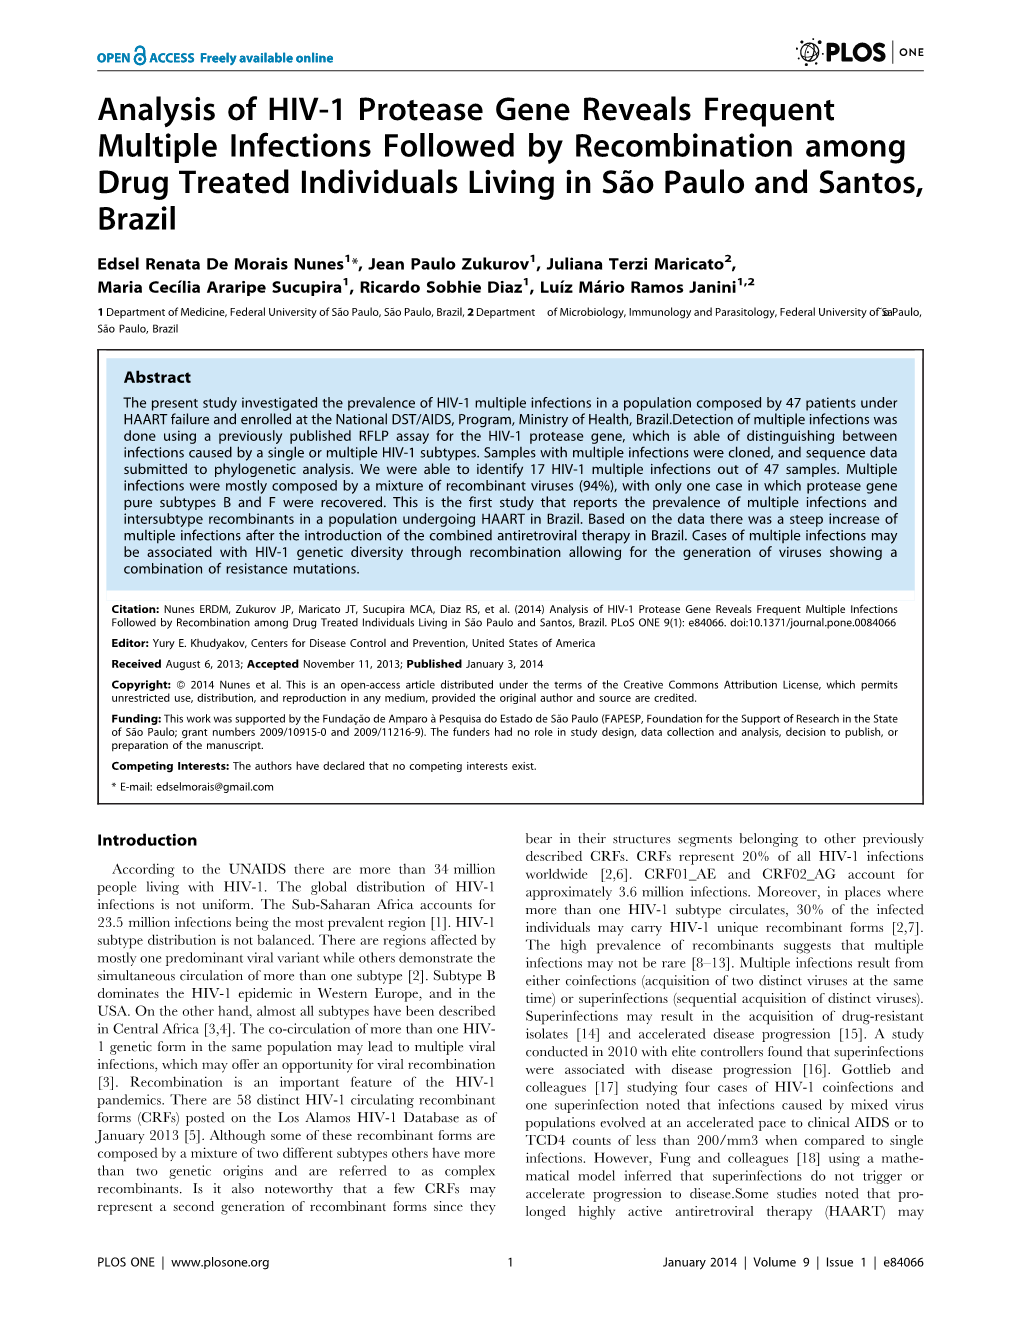 Analysis of HIV-1 Protease Gene Reveals Frequent Multiple Infections Followed by Recombination Among Drug Treated Individuals Living in Sa˜O Paulo and Santos, Brazil